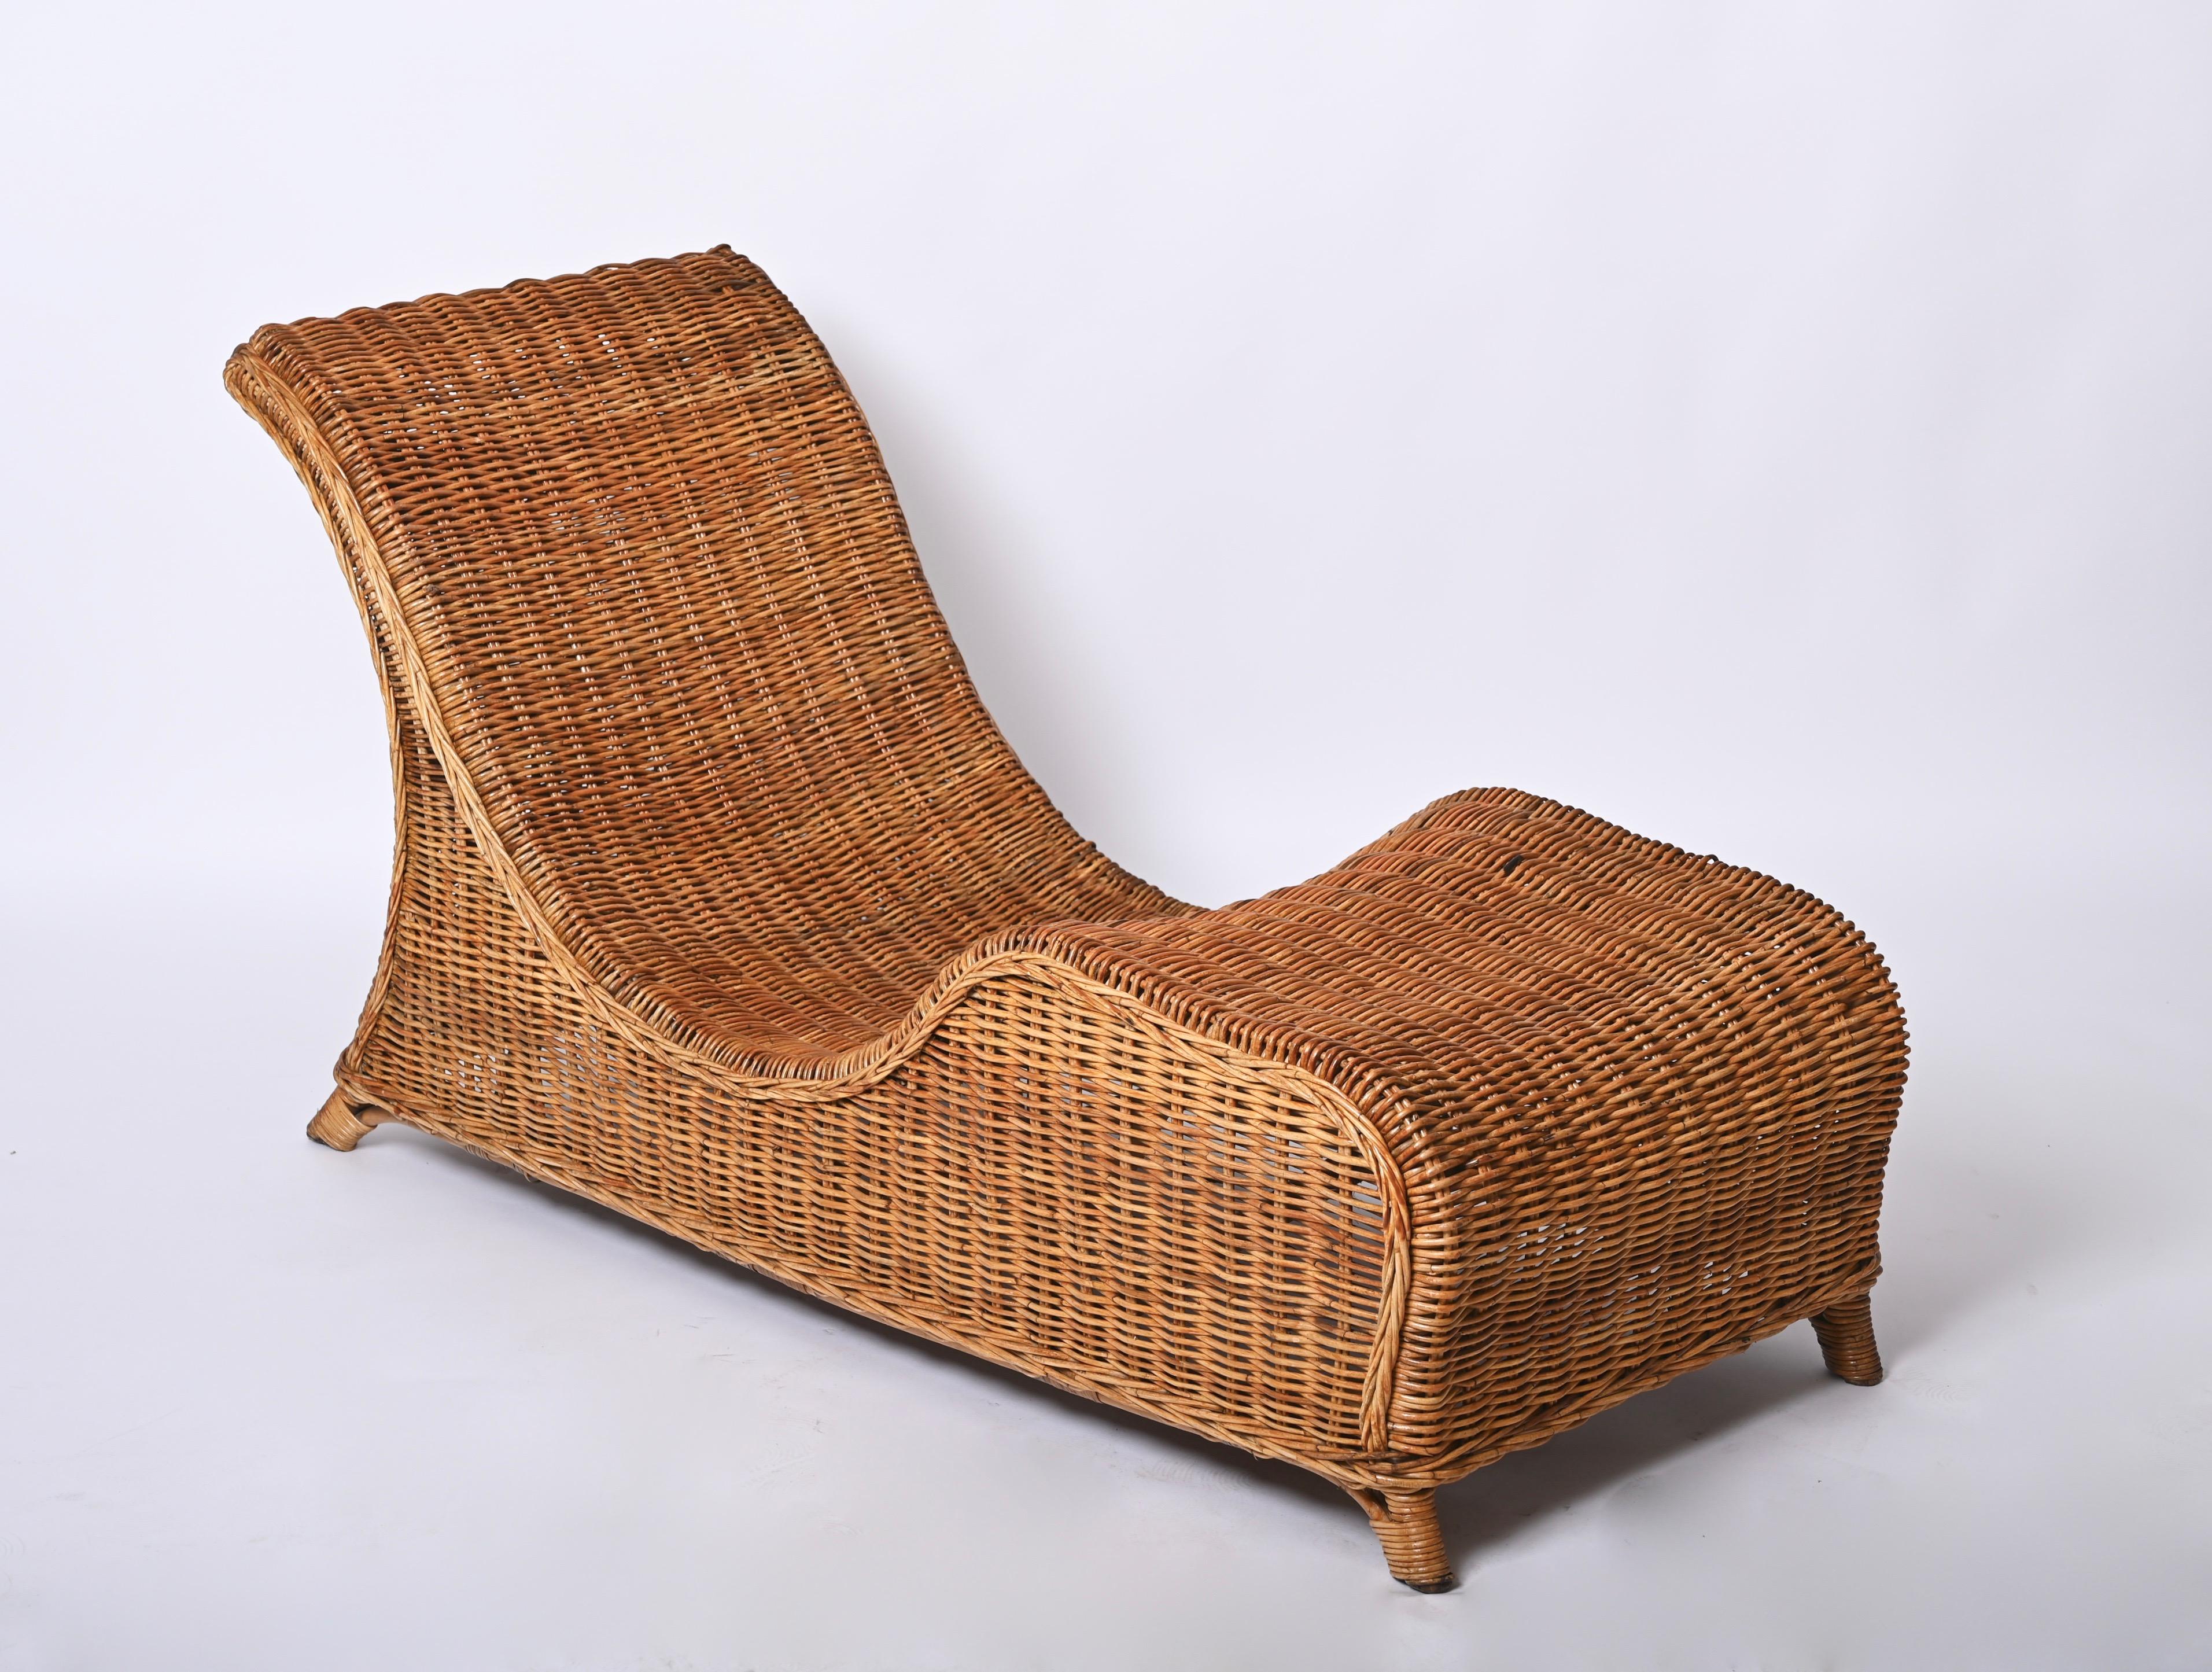 Midcentury Modern Bamboo and Wicker Italian Chaise Longue, 1960s For Sale 3